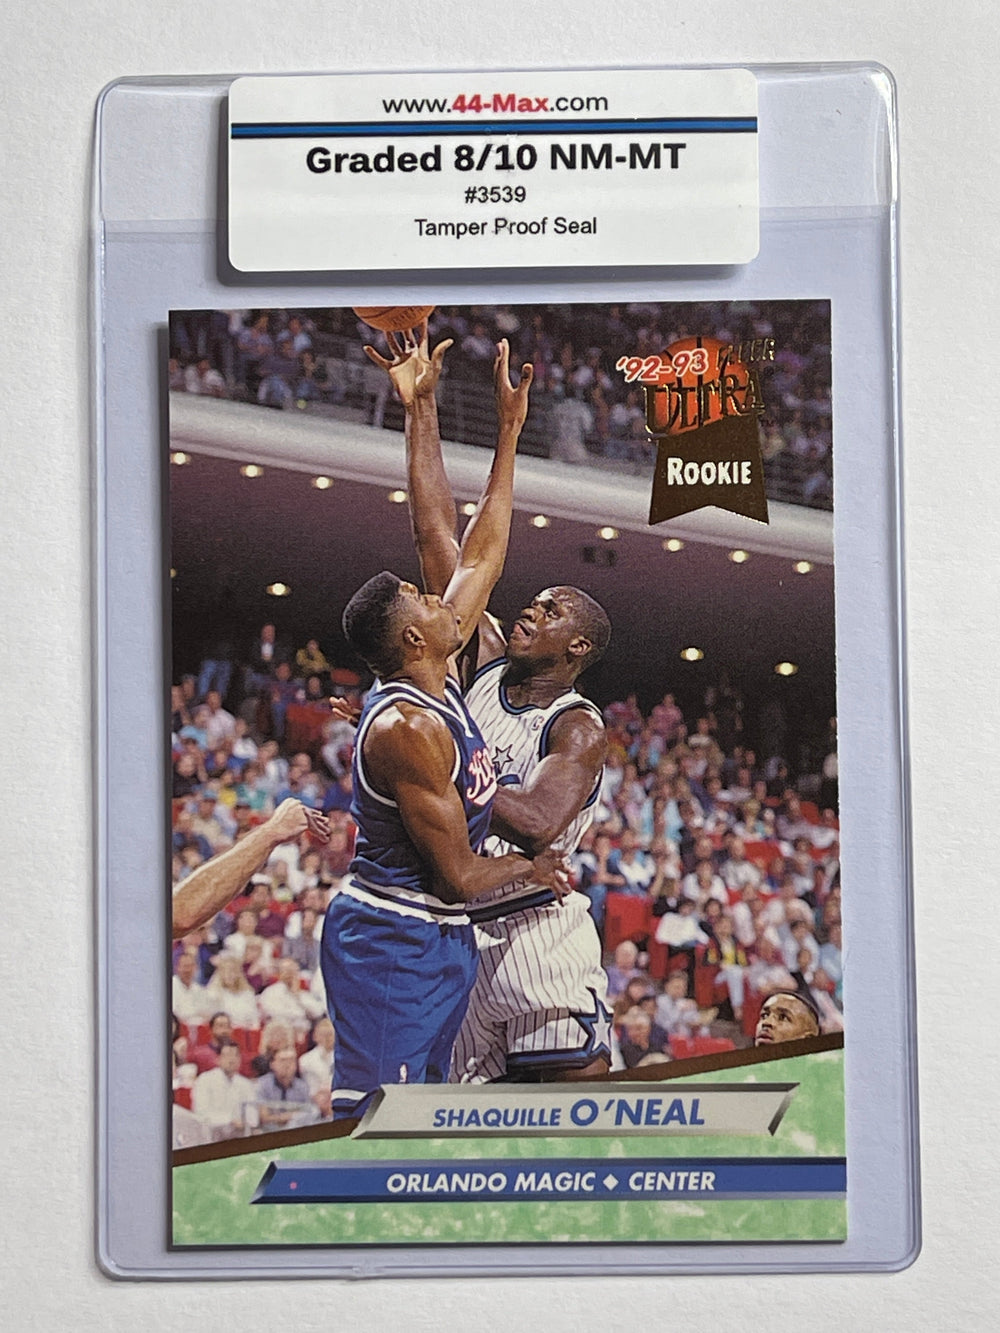 Shaquille O'Neal 1992/93 Ultra Basketball Card. 44-Max 8/10 NM-MT #3539